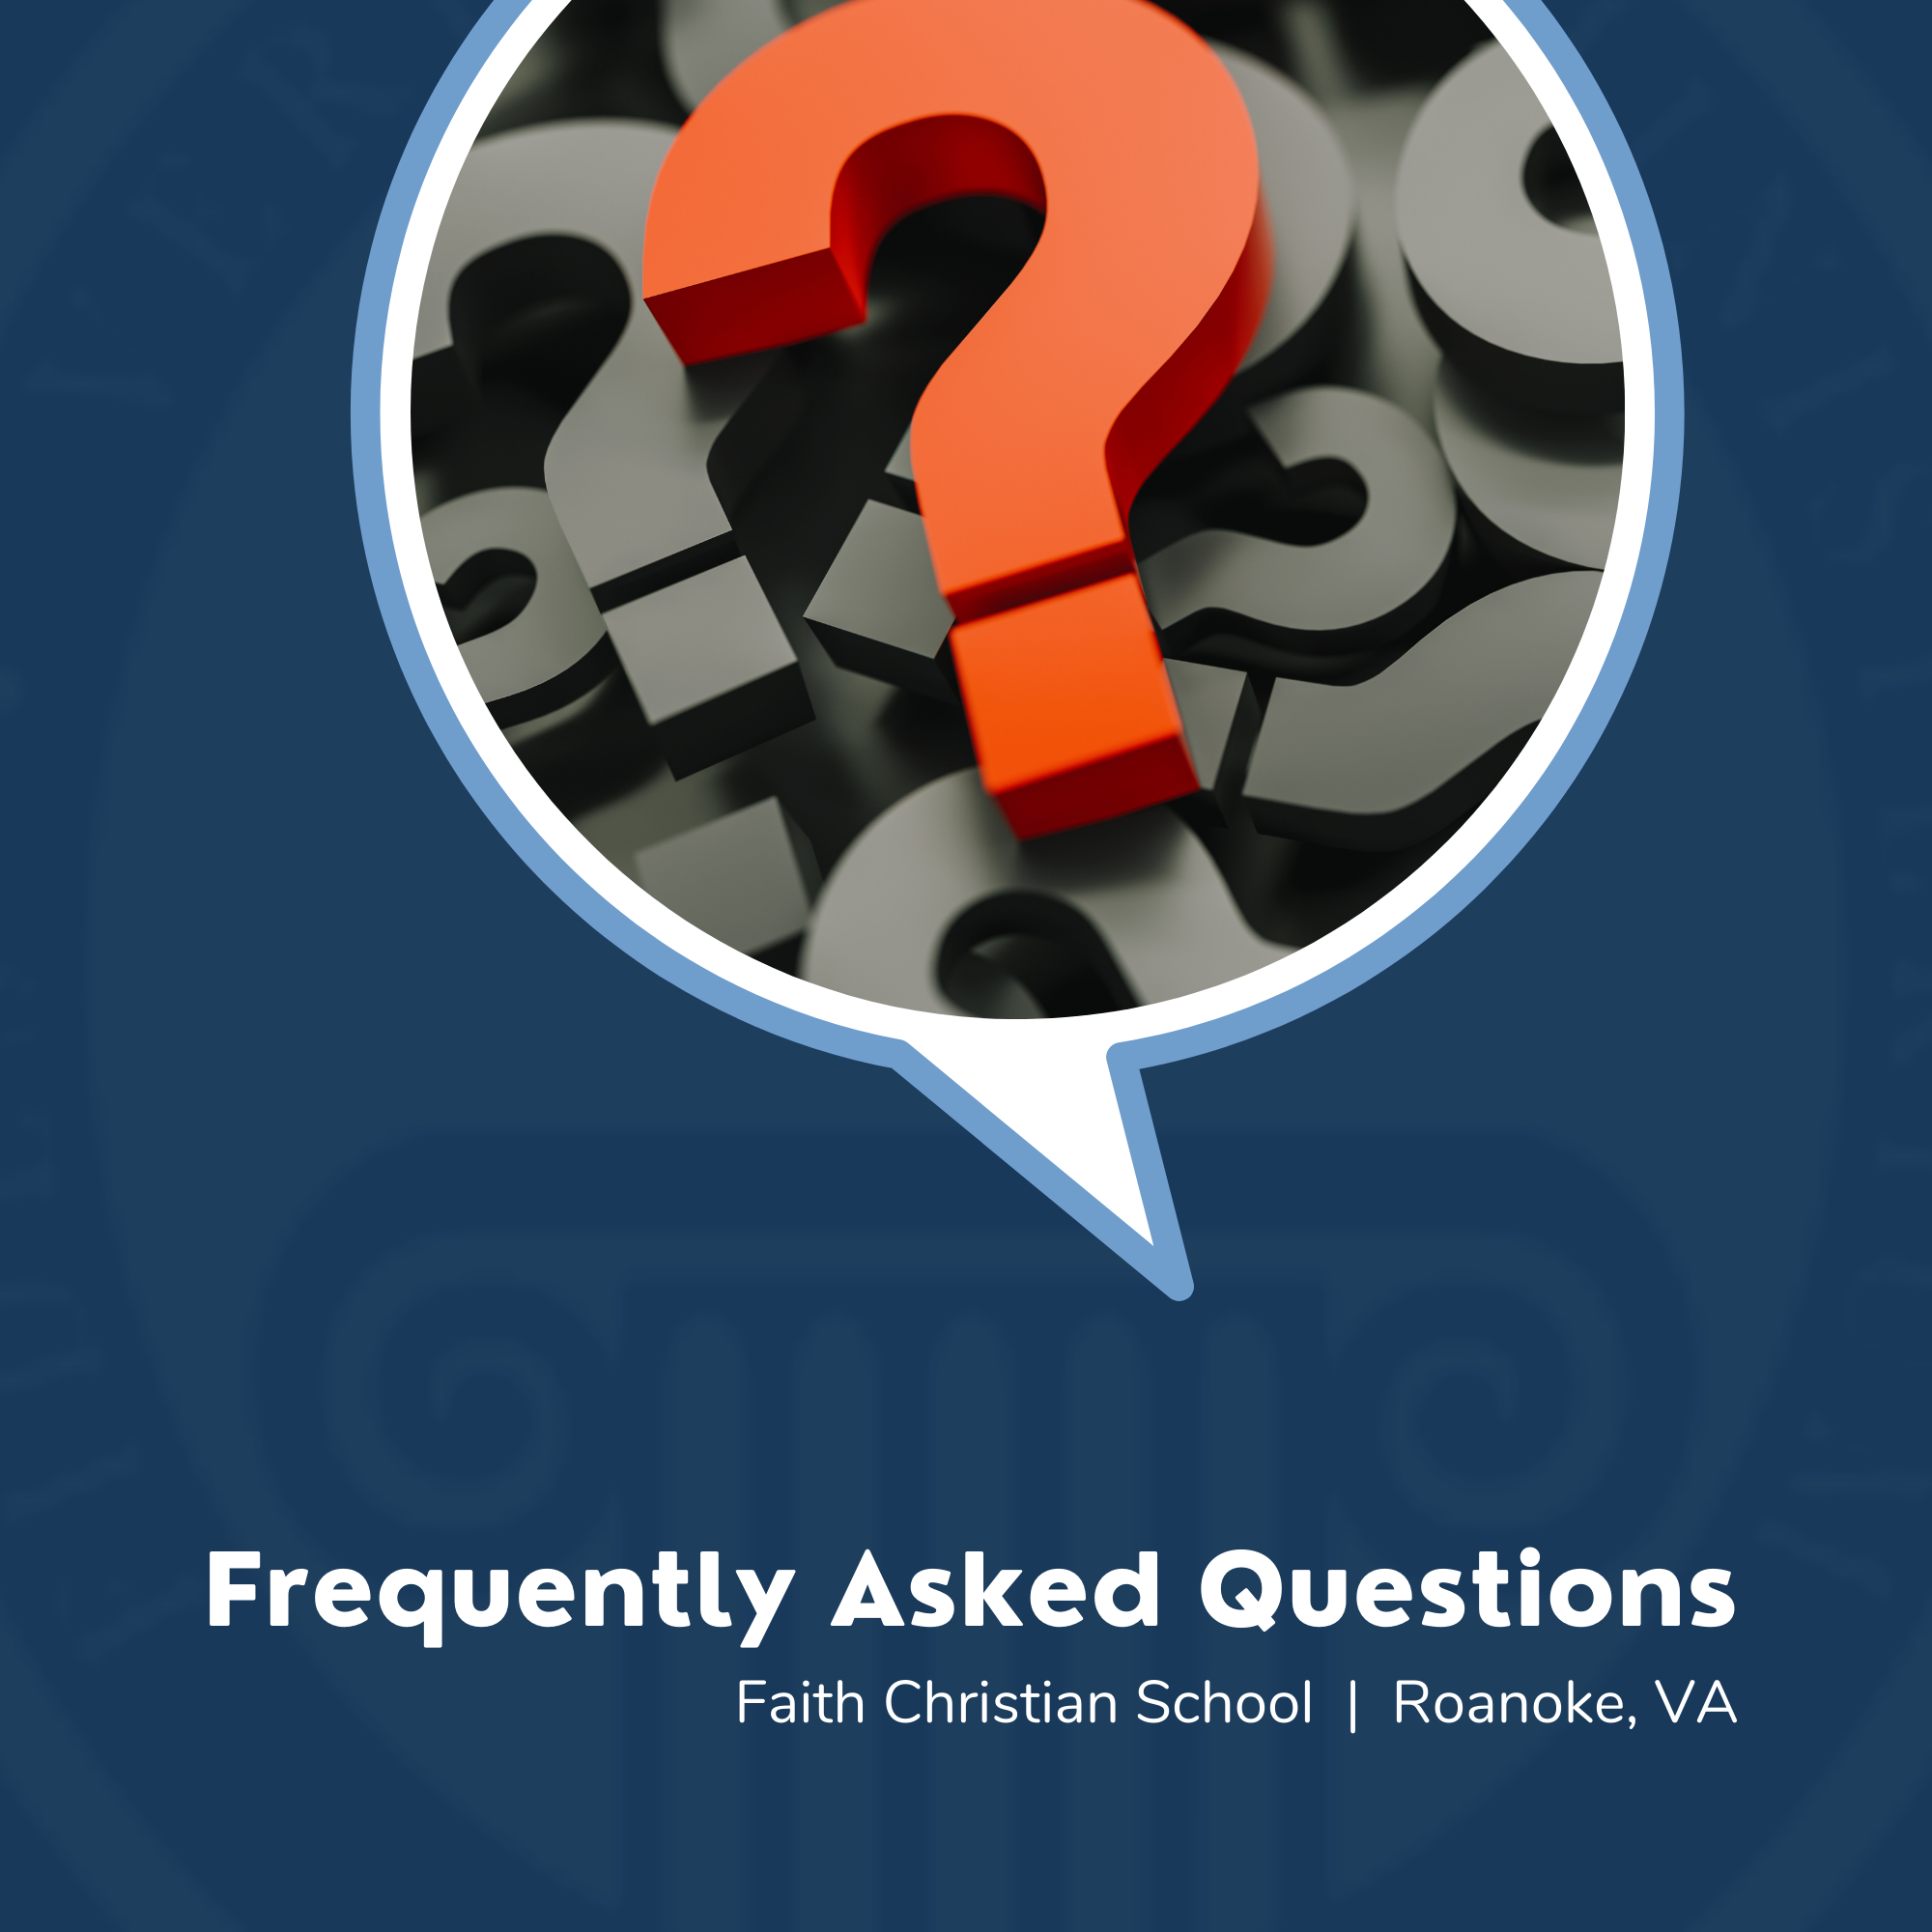 faith-christian-school-frequently-asked-questions-roanoke-va